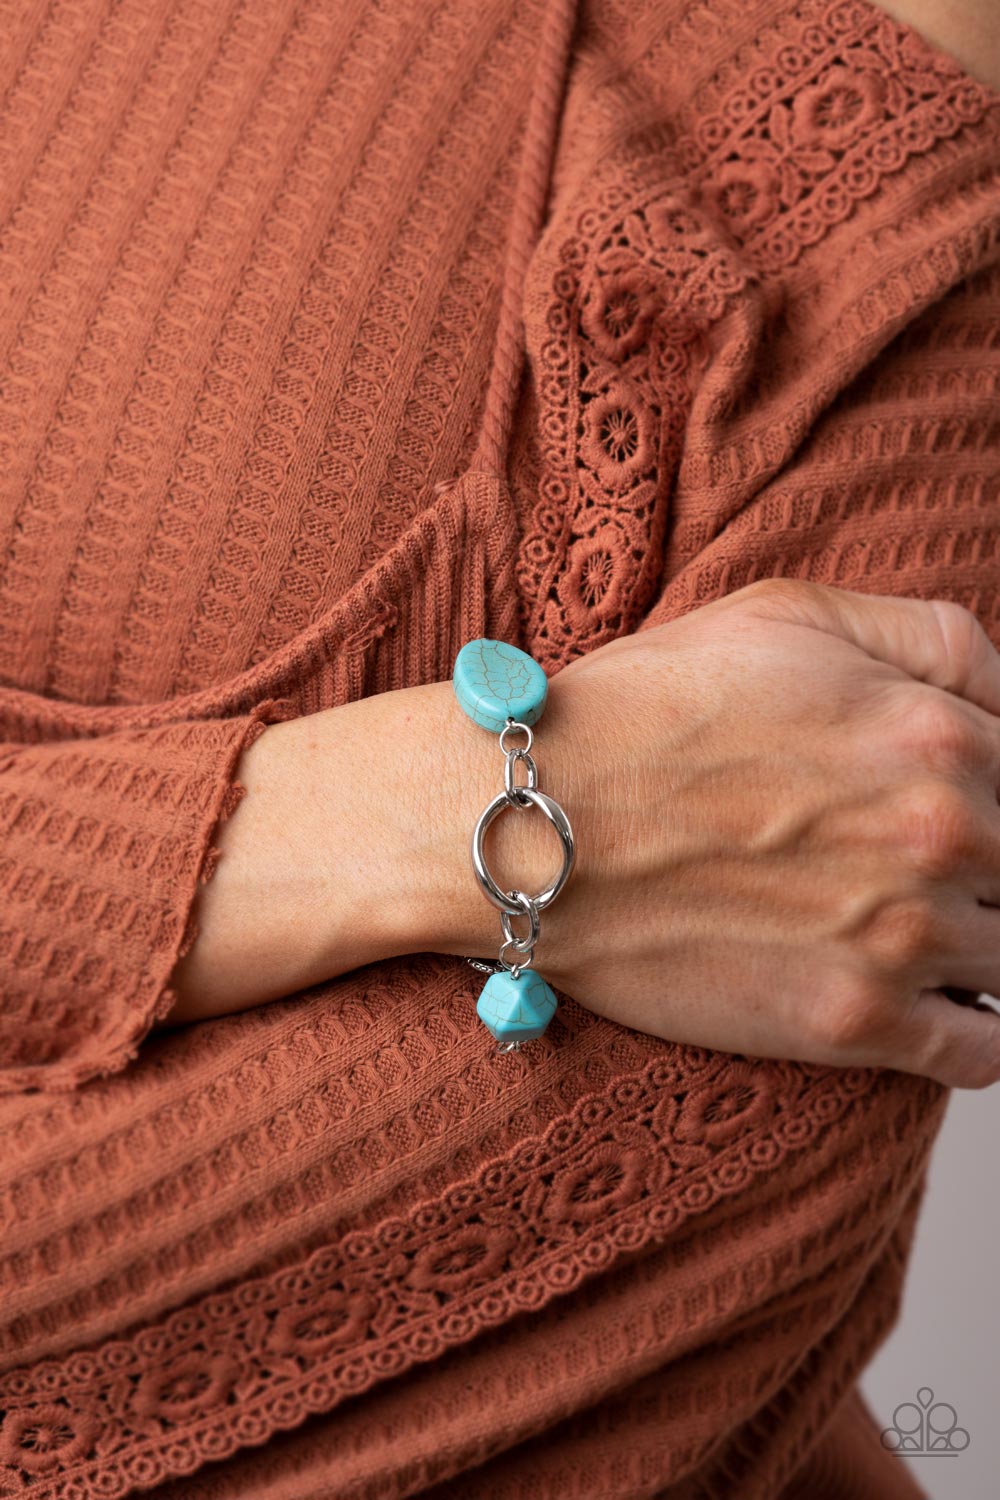 Hola, SONORA - Blue Turquoise and Silver Bracelet - Paparazzi Accessories - An artfully mismatched assortment of oversized silver links and geometric turquoise stone beads delicately interlocks around the wrist for a desert inspired theme. Features an adjustable clasp closure.